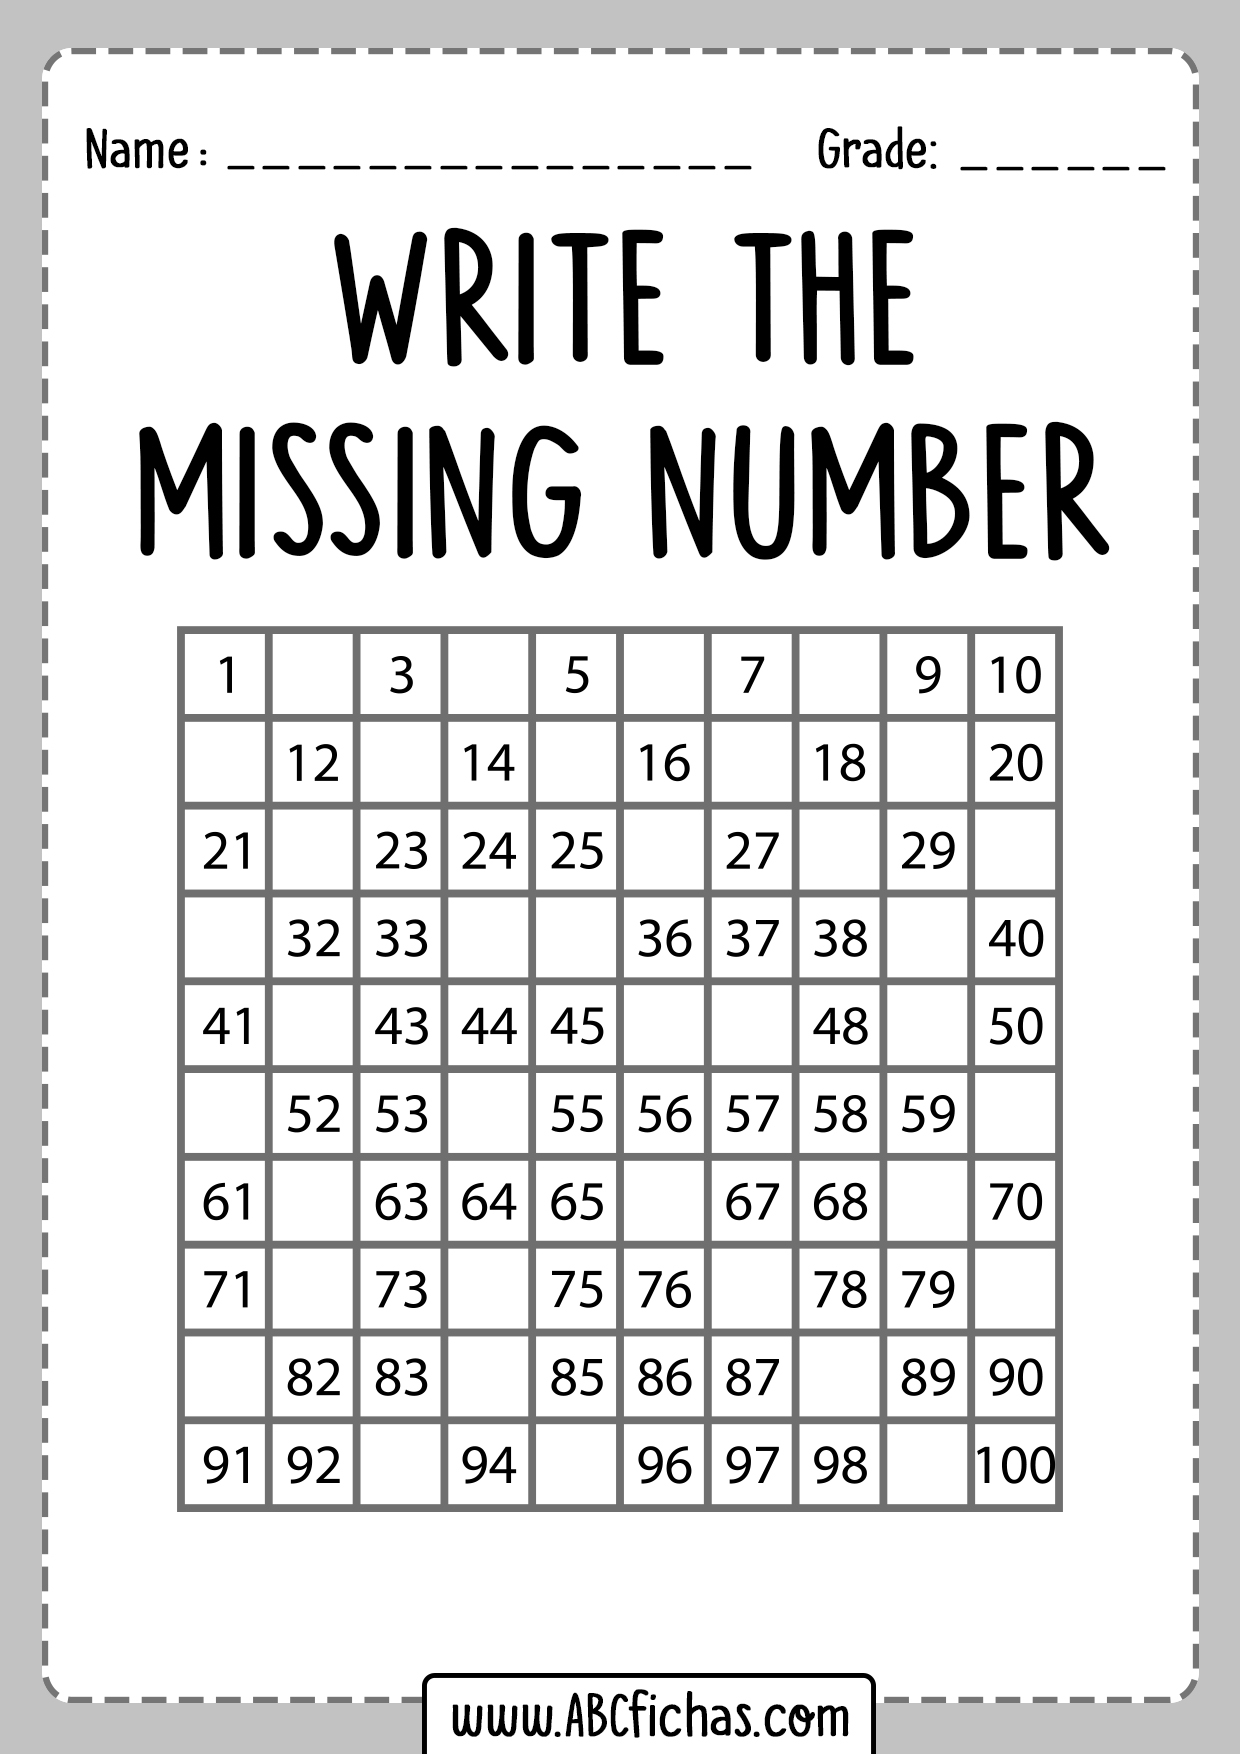 find-missing-numbers-worksheets-abc-fichas